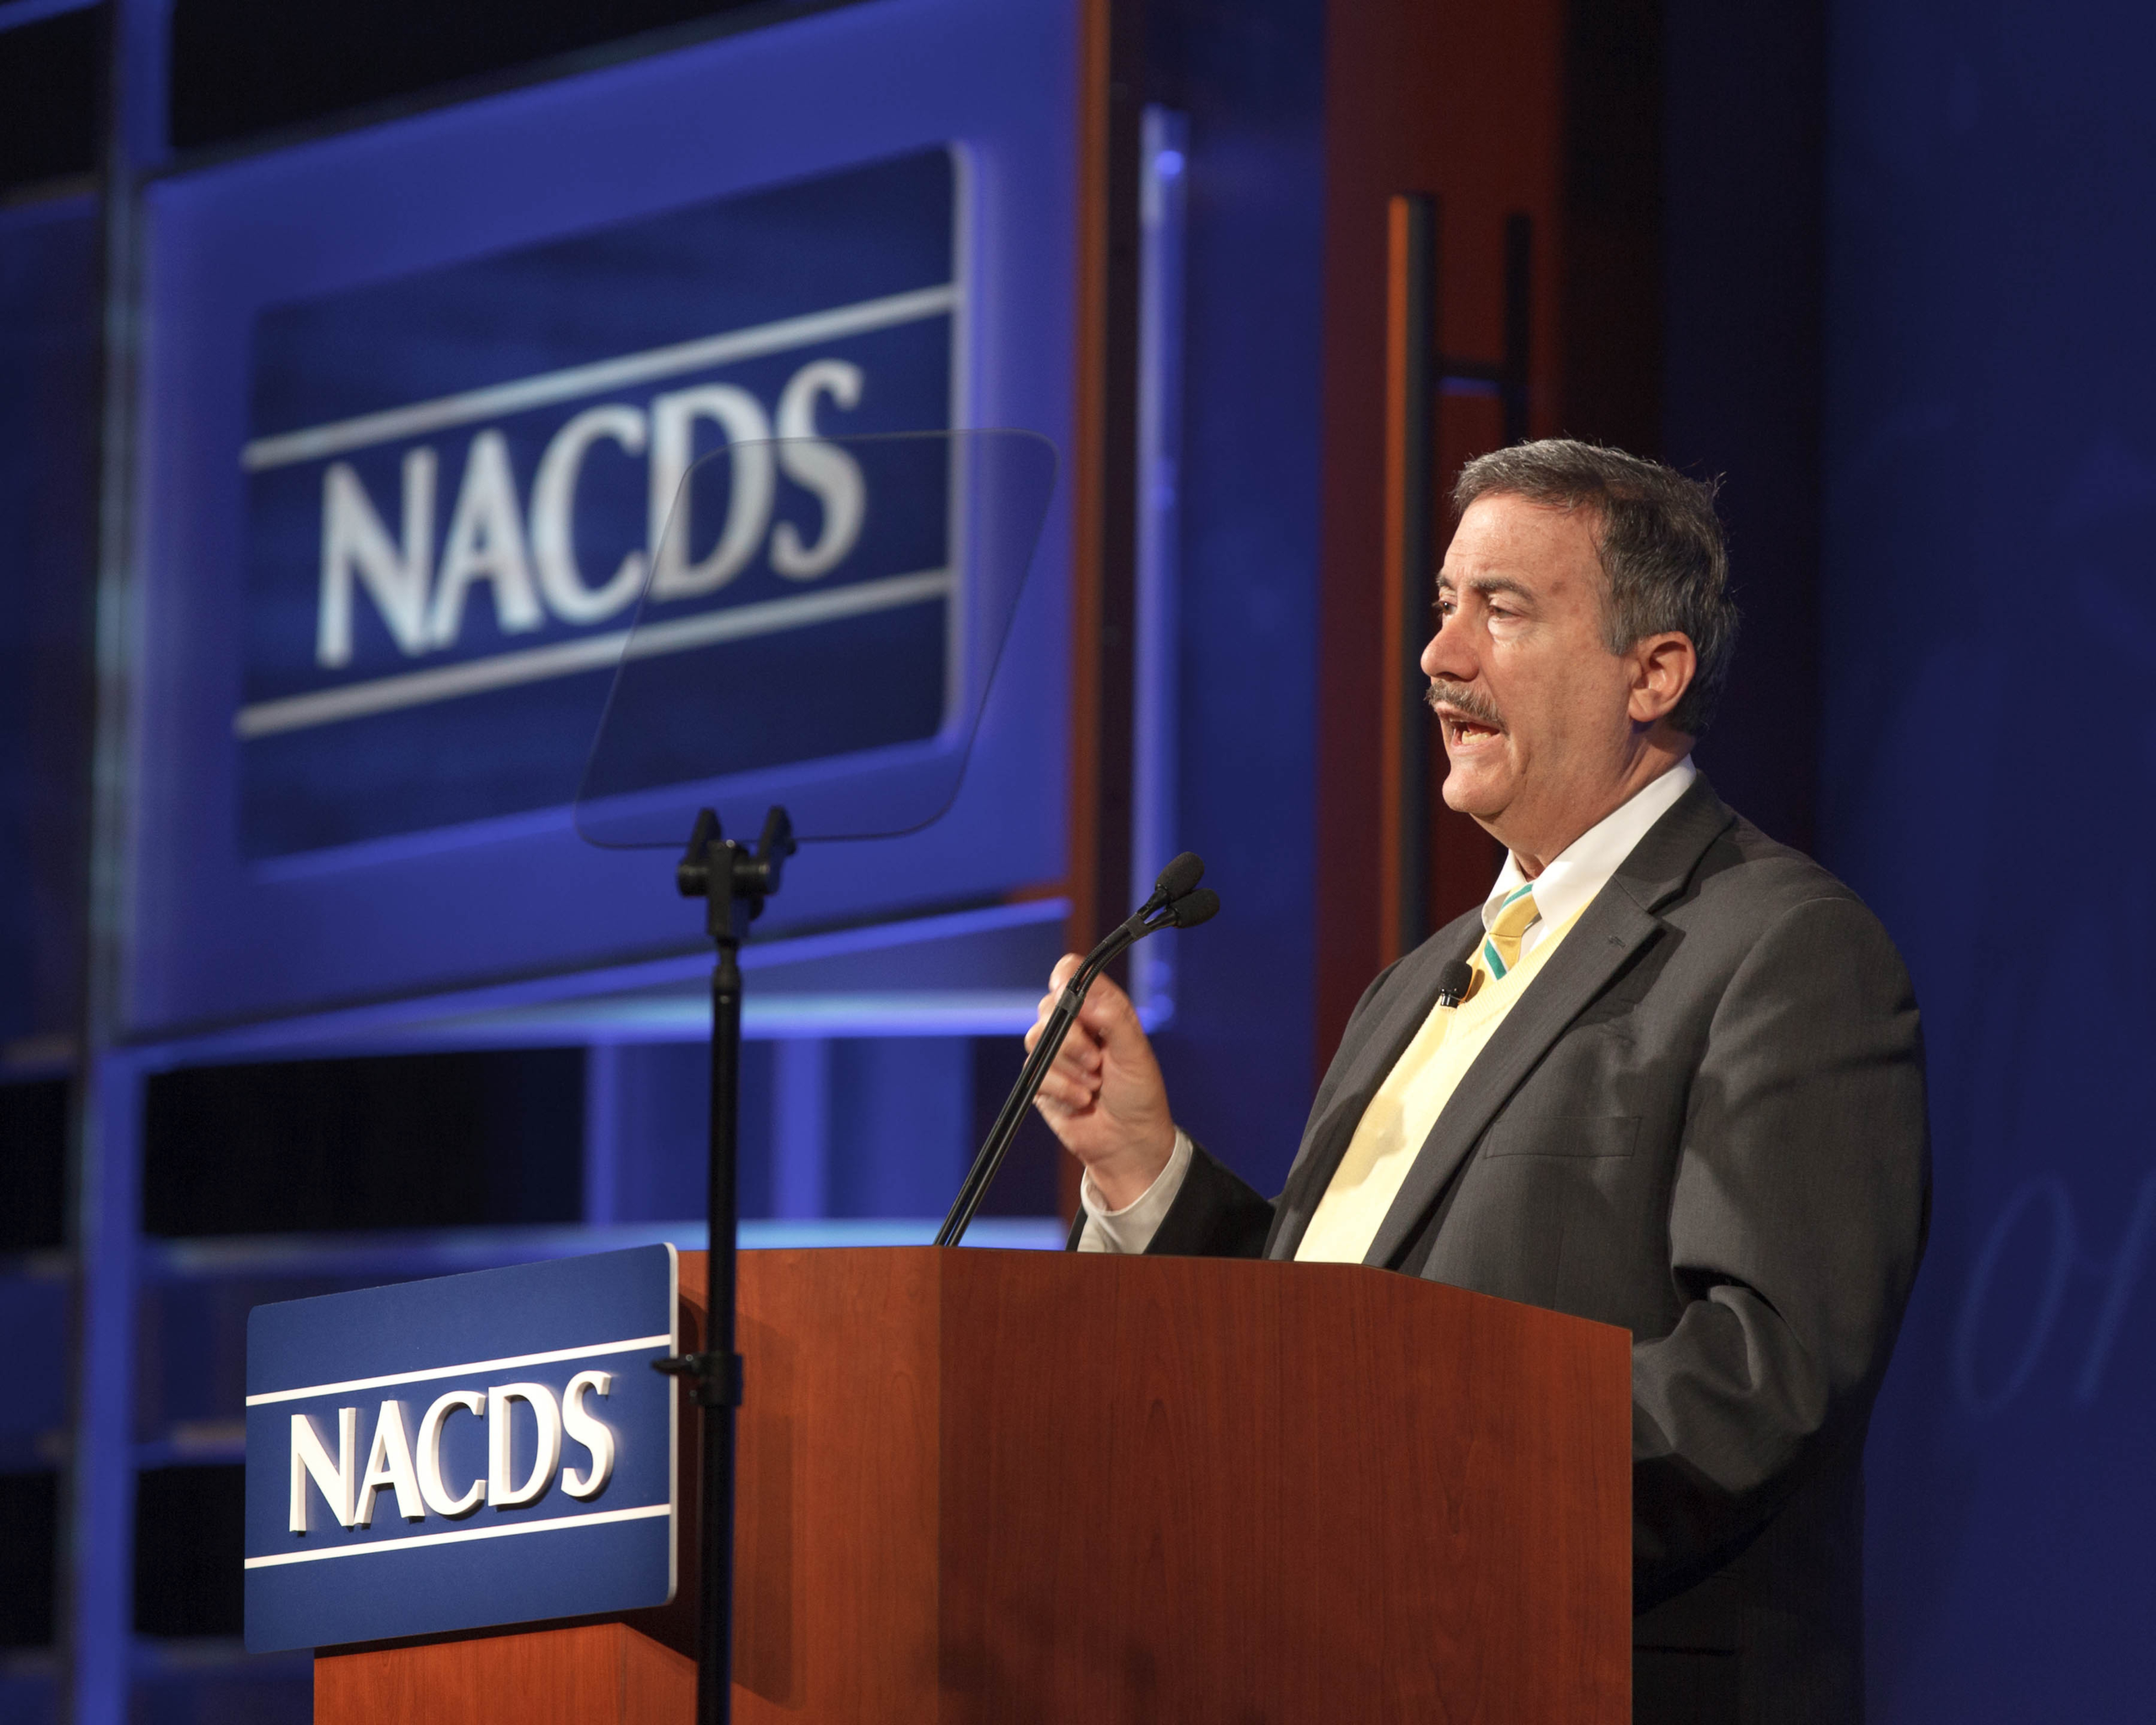 Dr. Larry J. Sabato, pictured here at the 2012 NACDS Annual Meeting